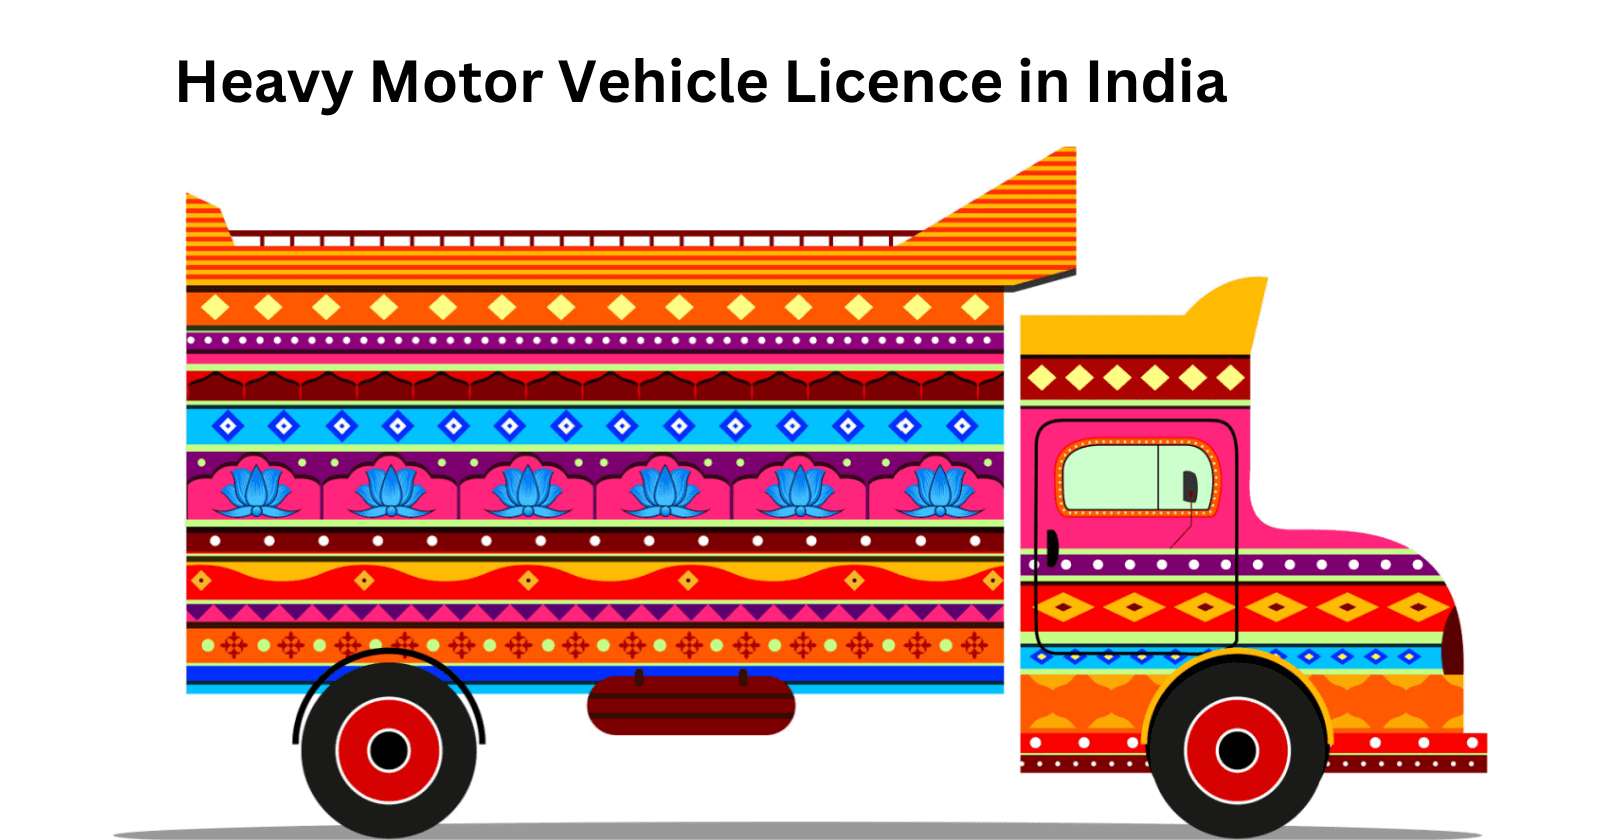 How to Get a Heavy Motor Vehicle Licence in India